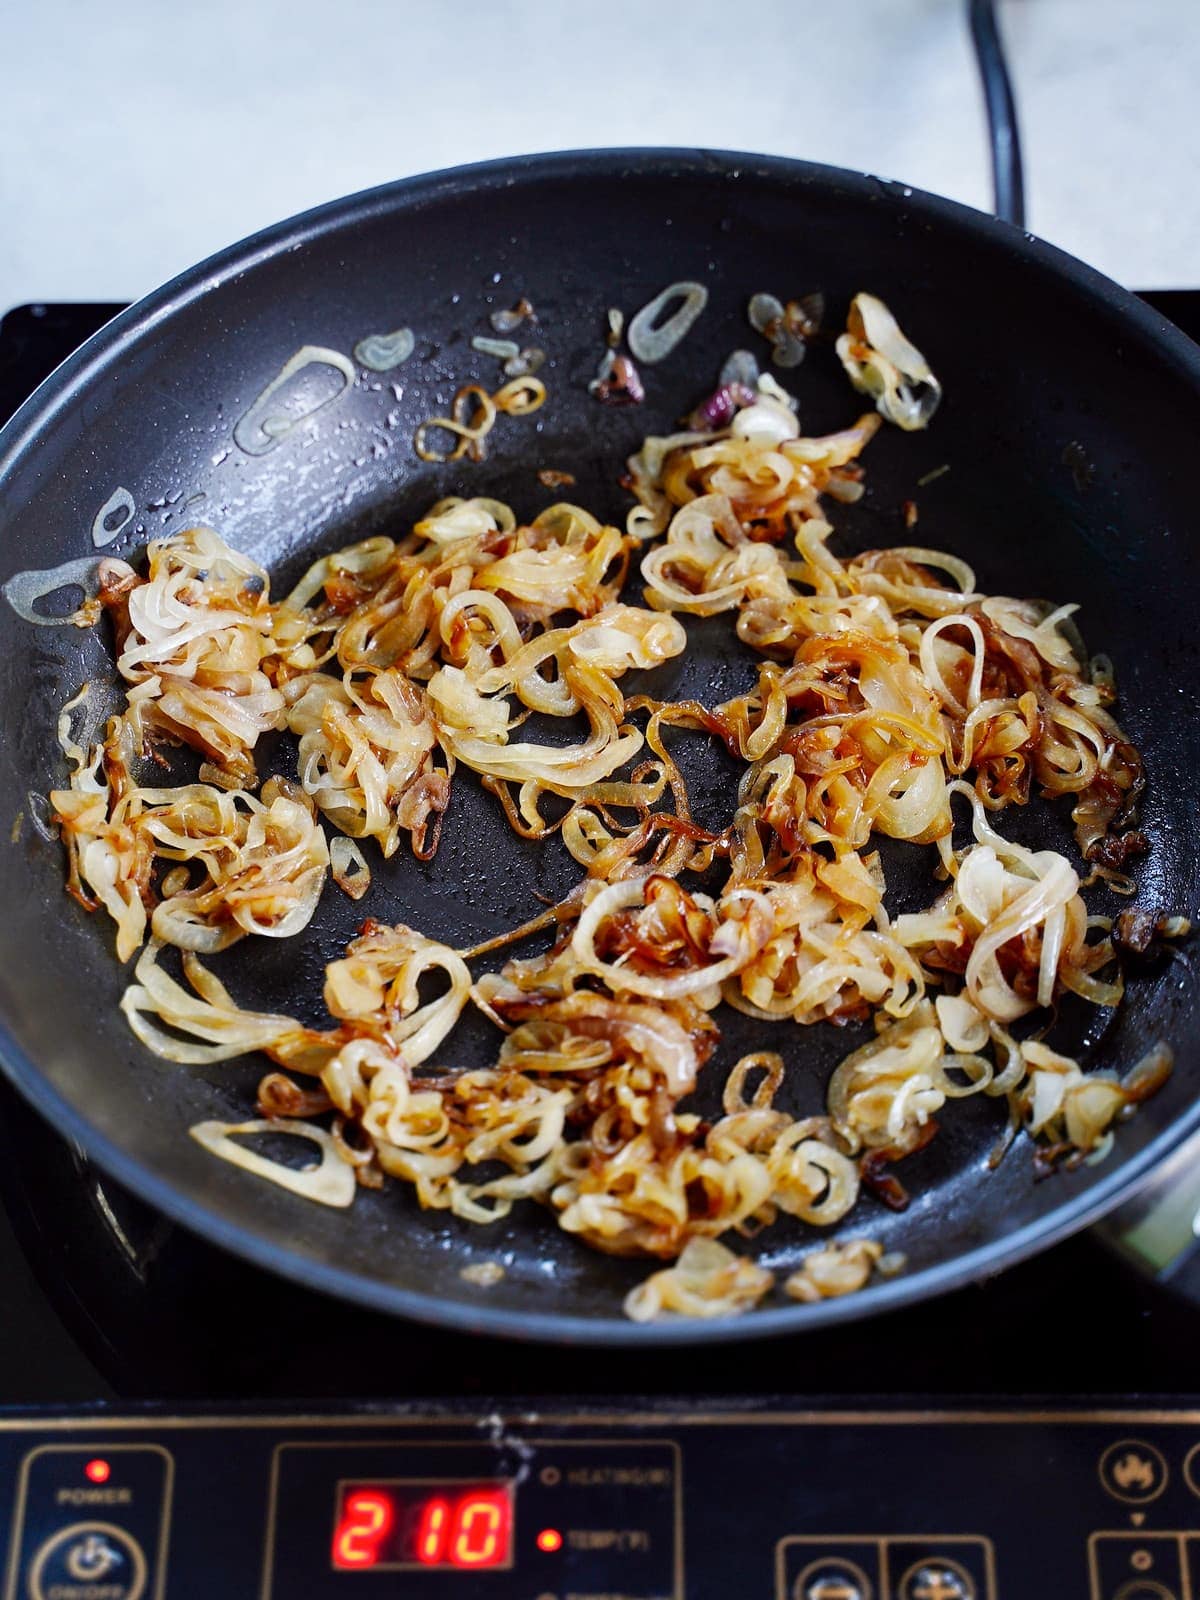 caramelized onions in black frying pan